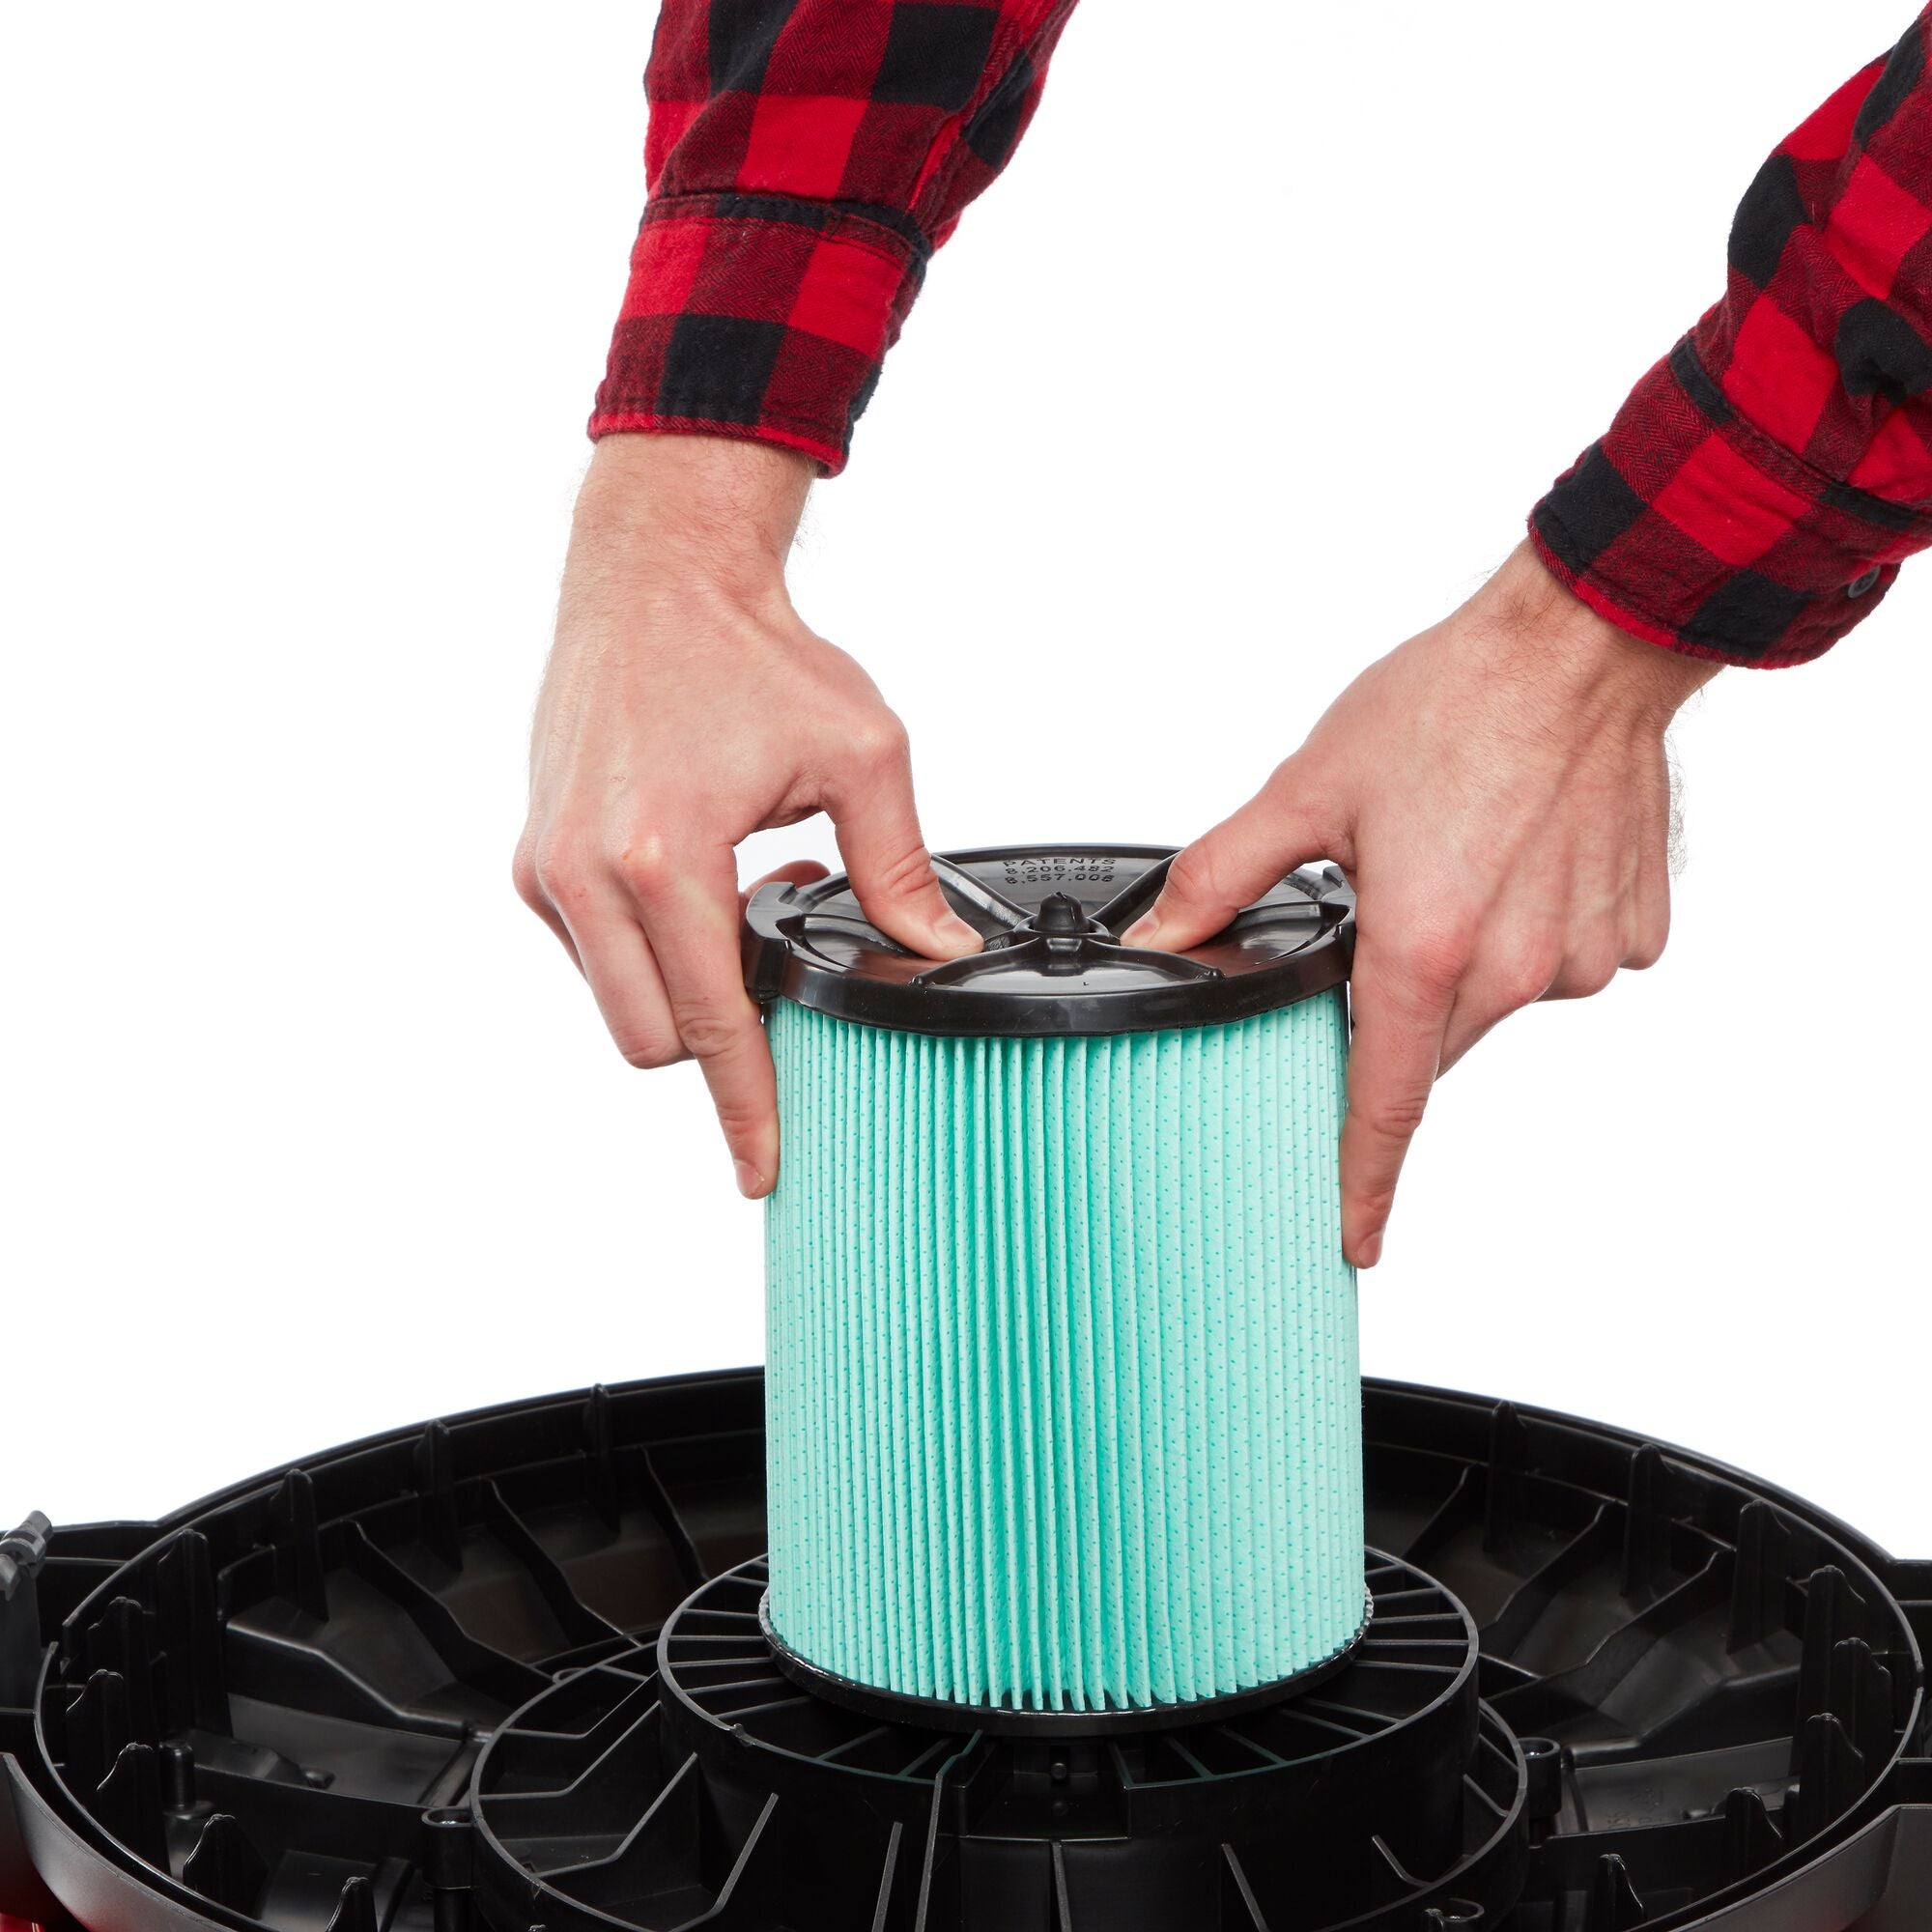 Person installing CRAFTSMAN HEPA Media Replacement Filter onto wet/dry shop vac powerhead